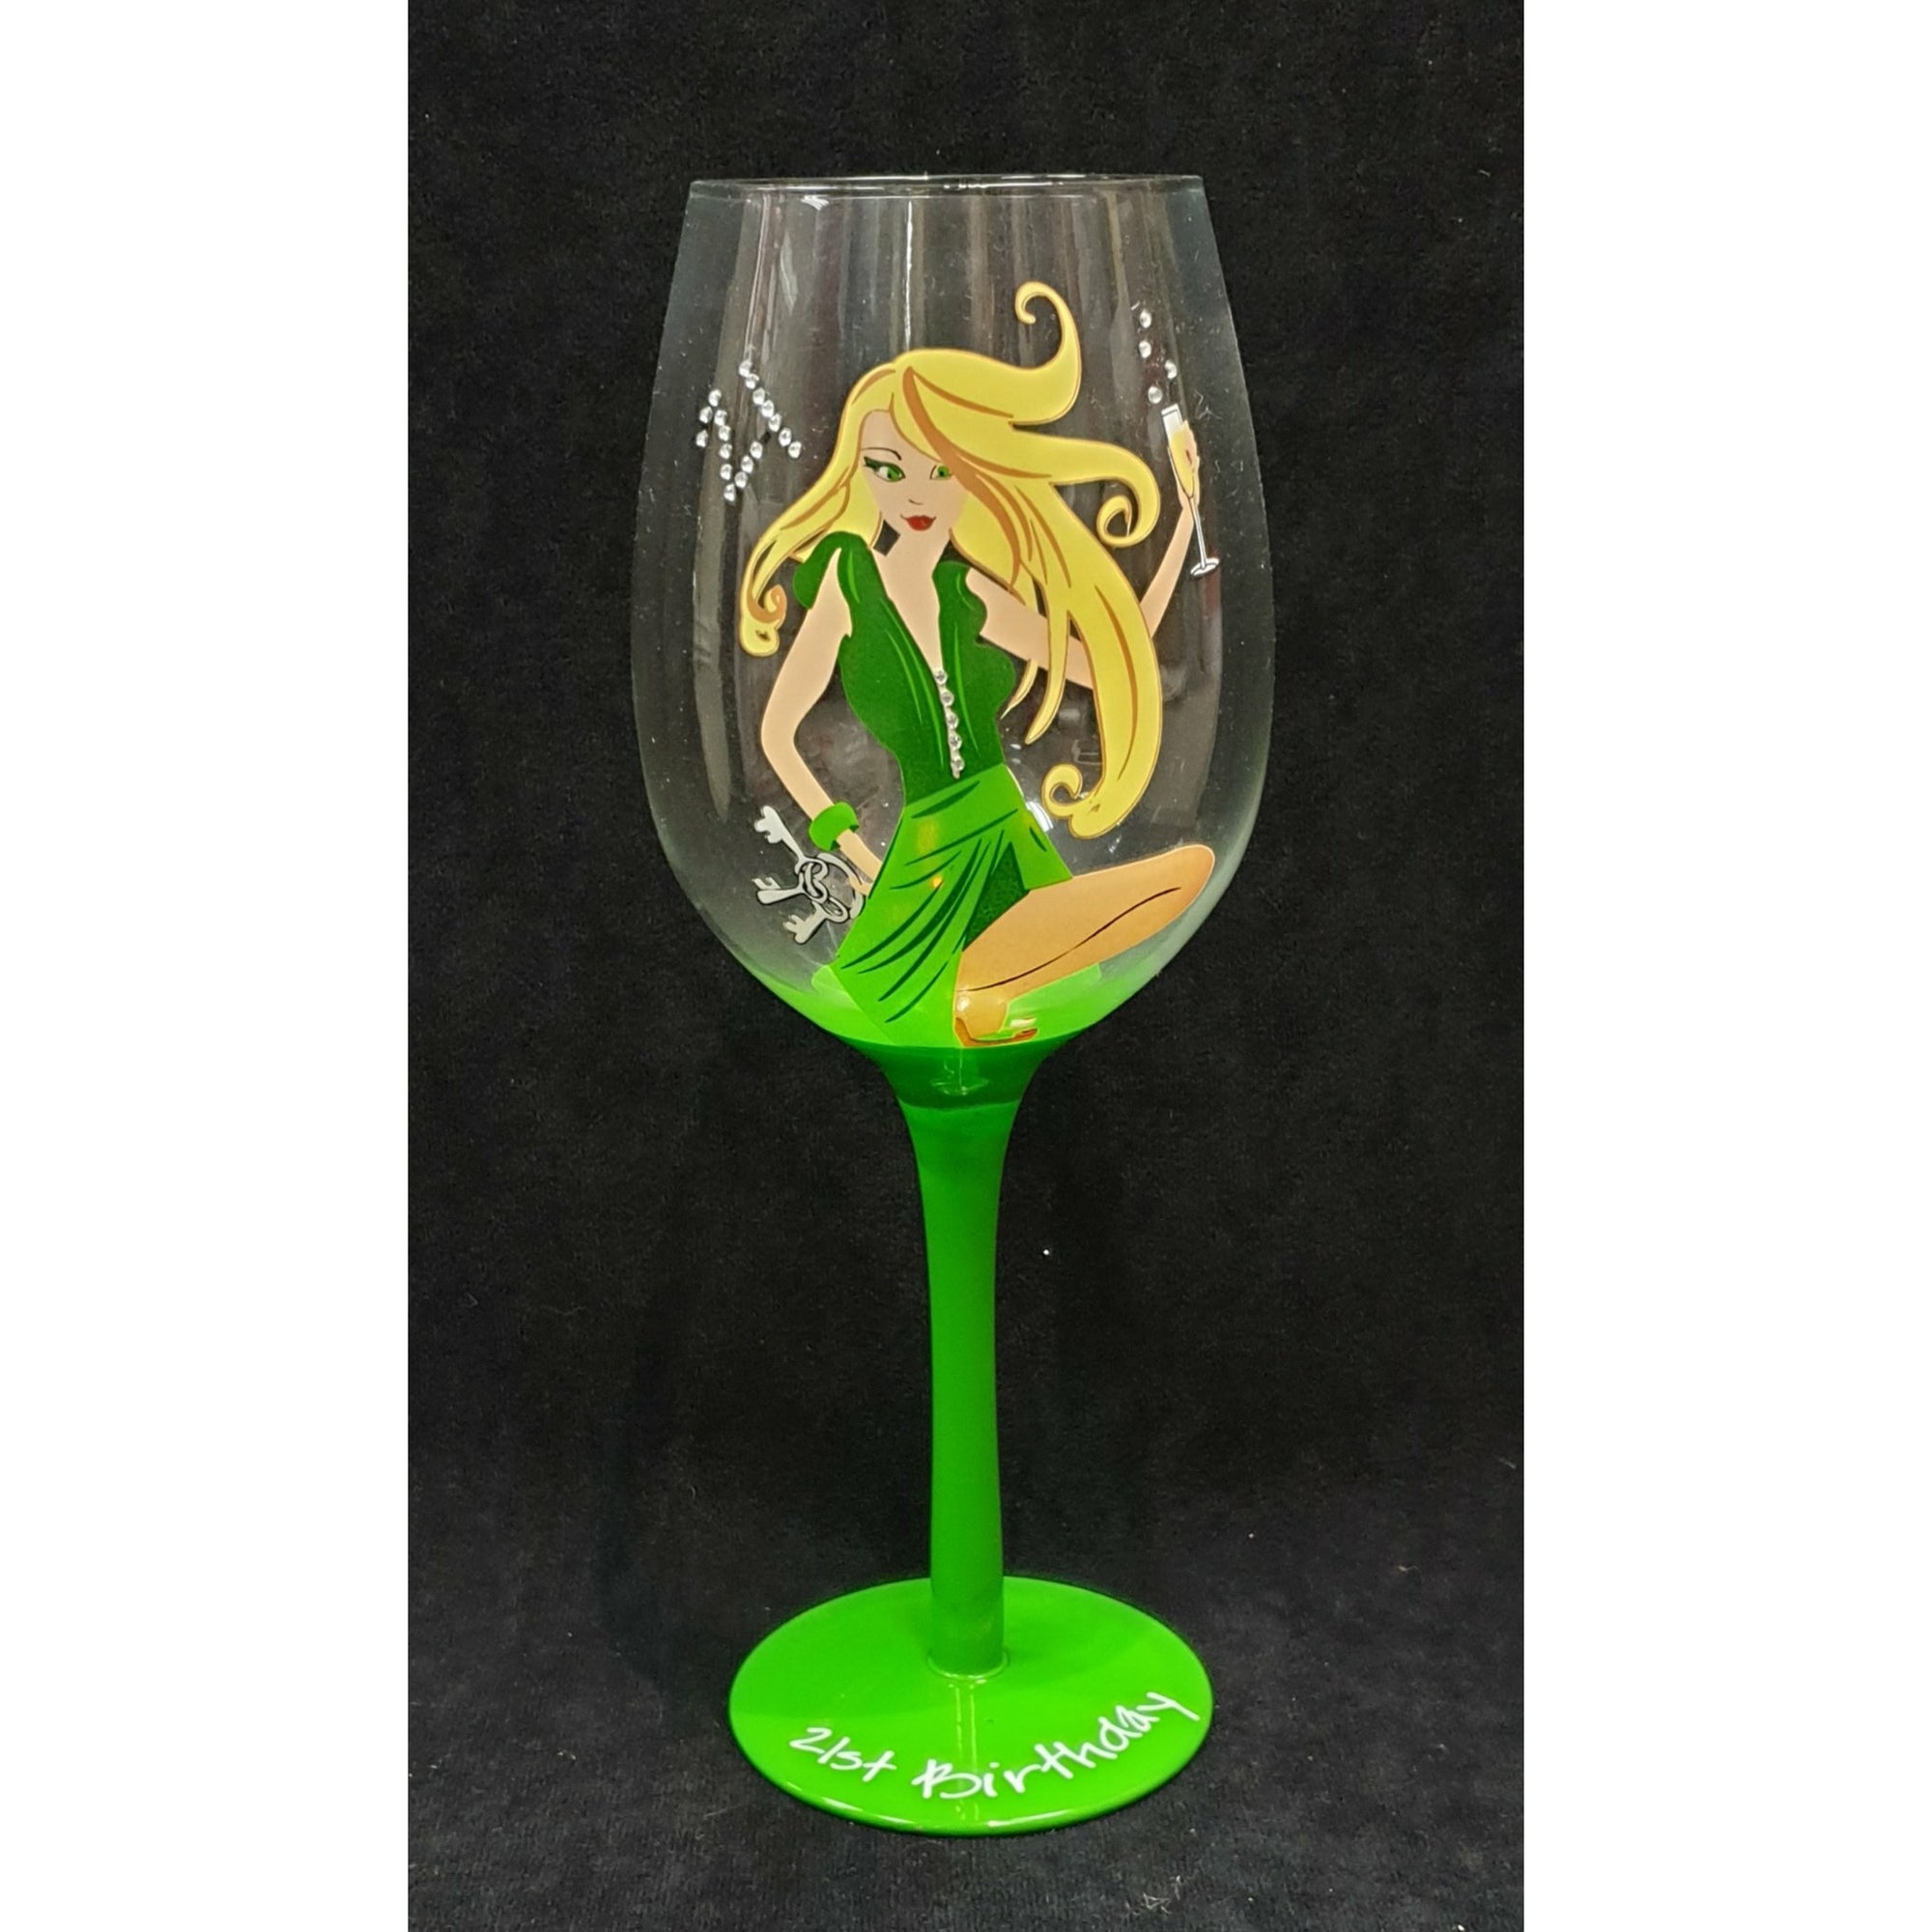 LADY WINE GLASS 21 Not specified